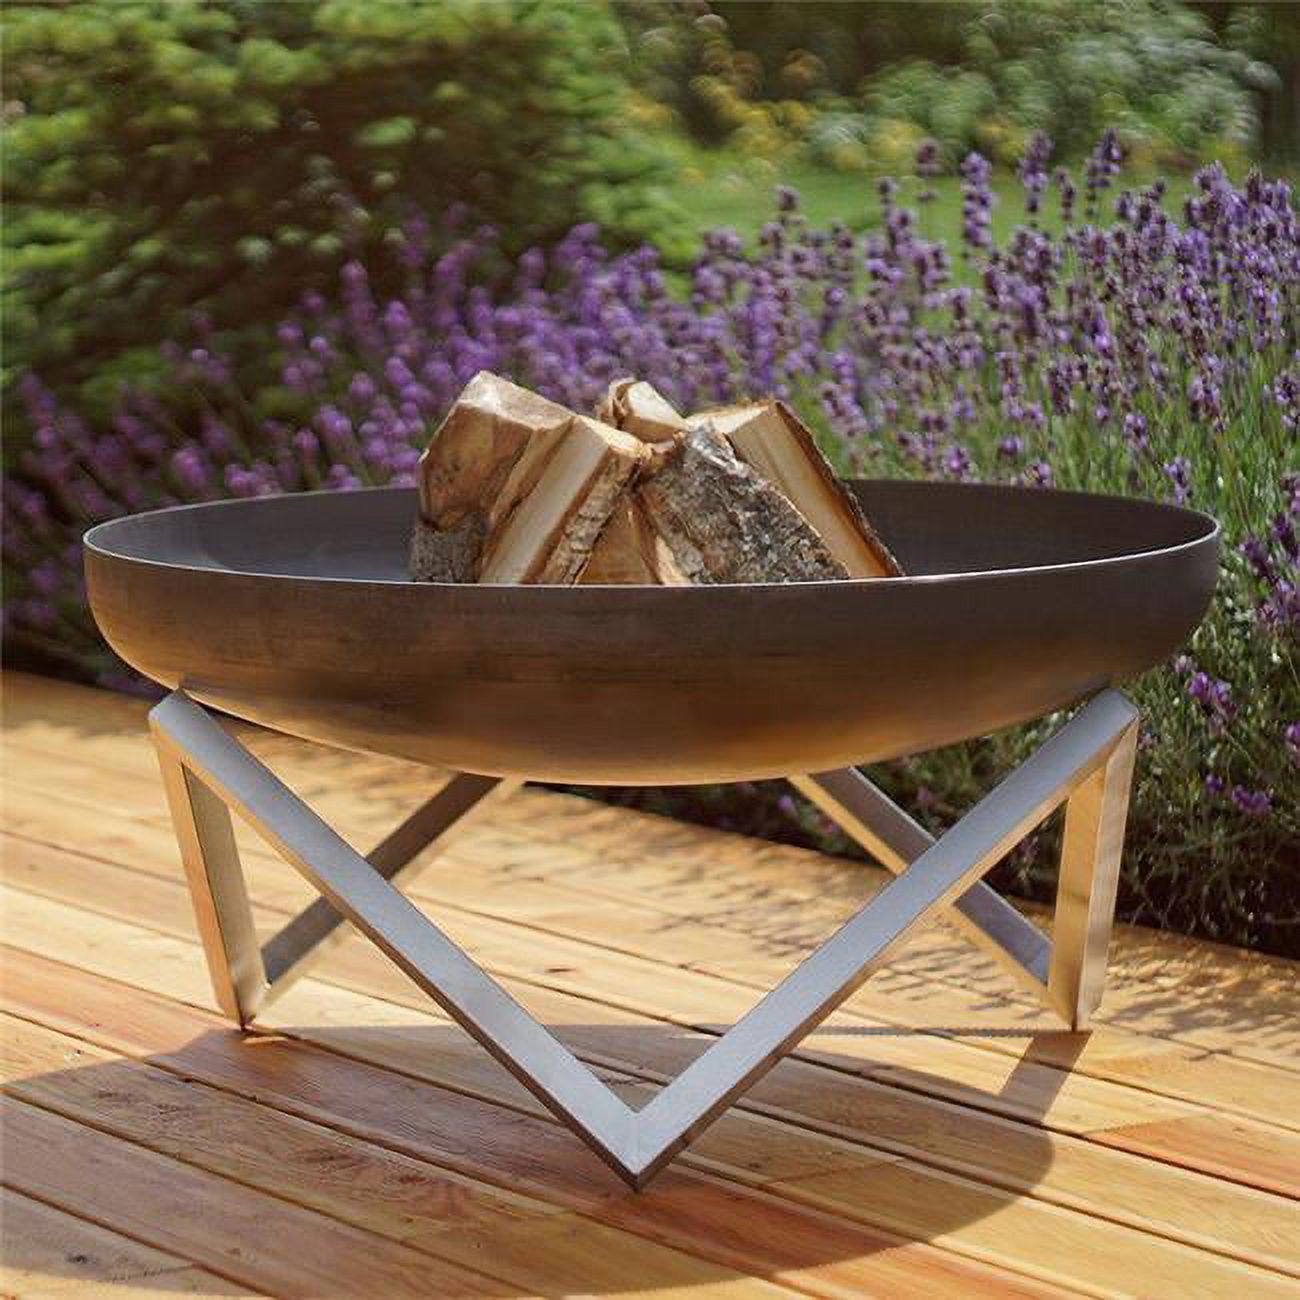 Curonian Z790MemelSt 31 in. Memel Stainless Steel Wood Burning Fire Pit - Silver&#44; Large&#44; 16 x 31 x 31 in. - image 1 of 1